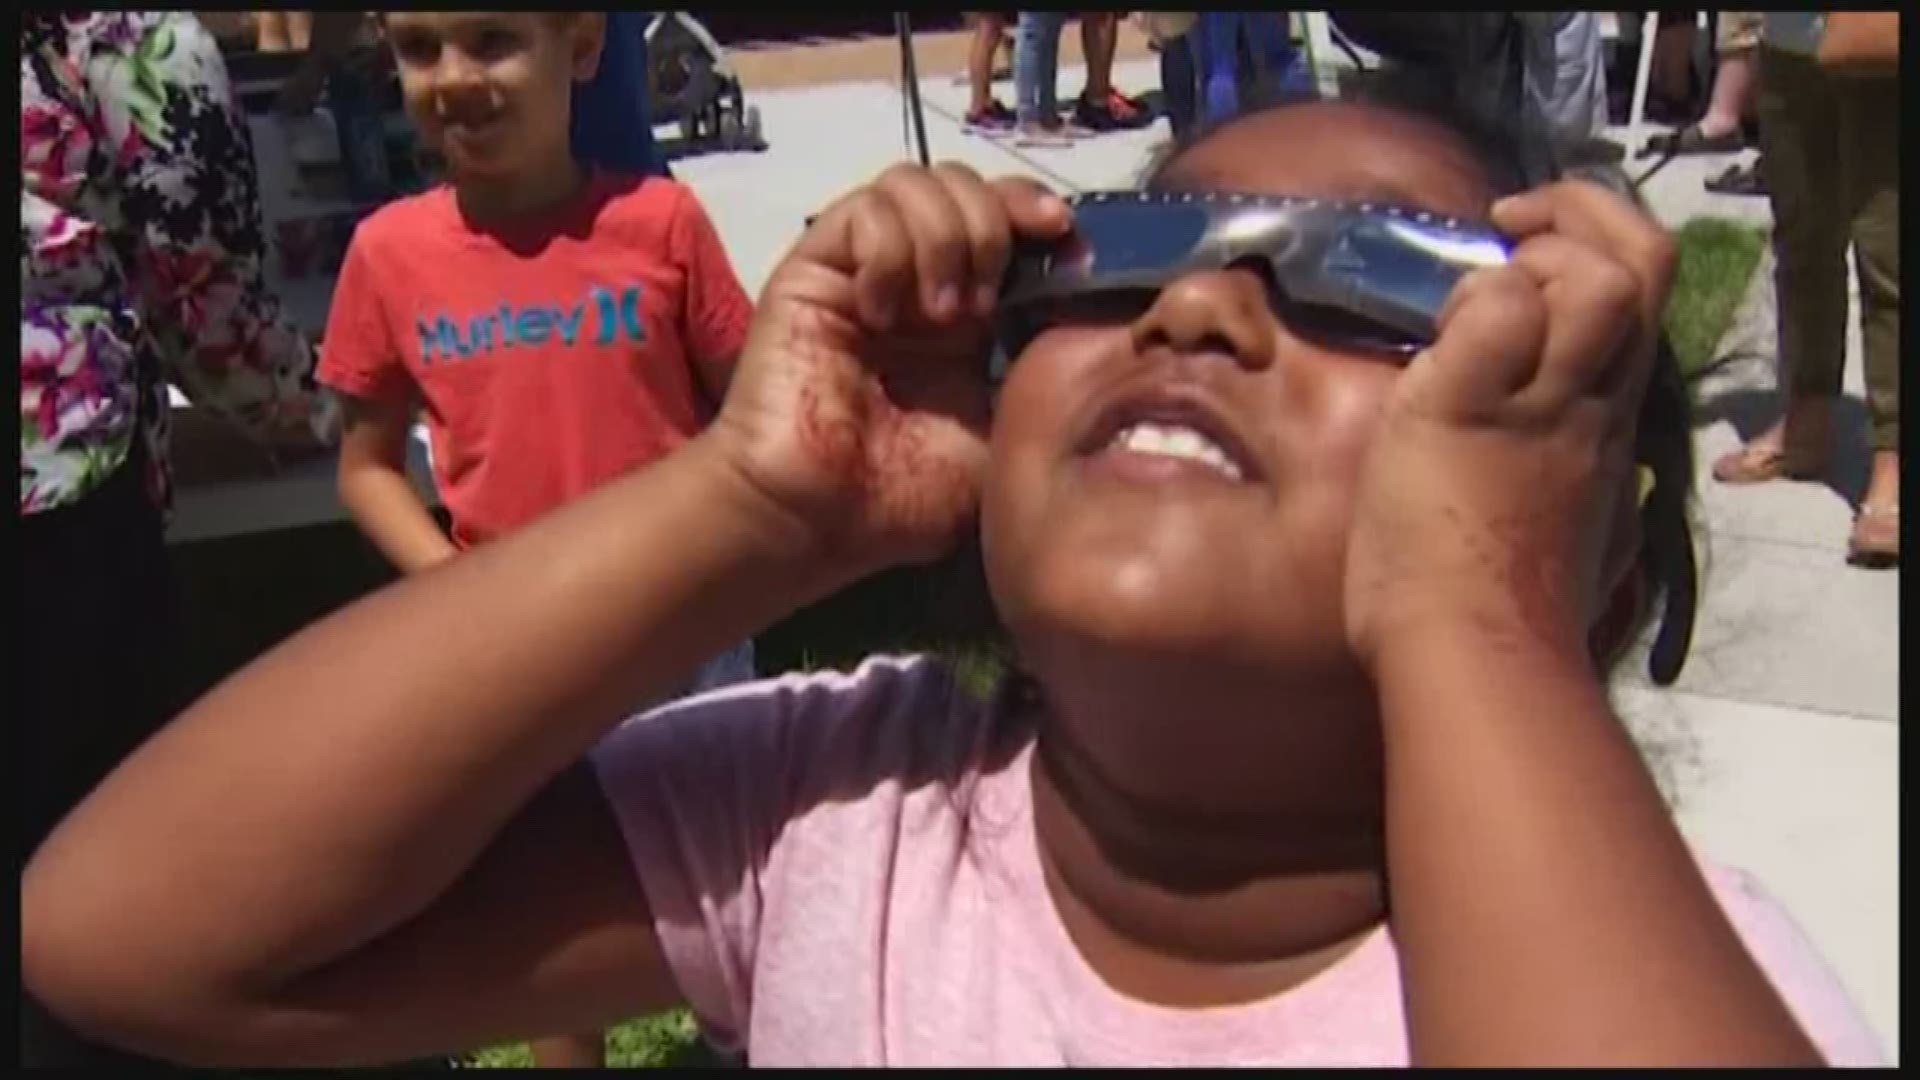 The solar eclipse was one of the most anticipated events of the year, and it drew quite a crowd to Space Center Houston. More than 3,000 people turned out there to see history. Through eclipse glasses, pinhole projections and even sun-spotters, they got t